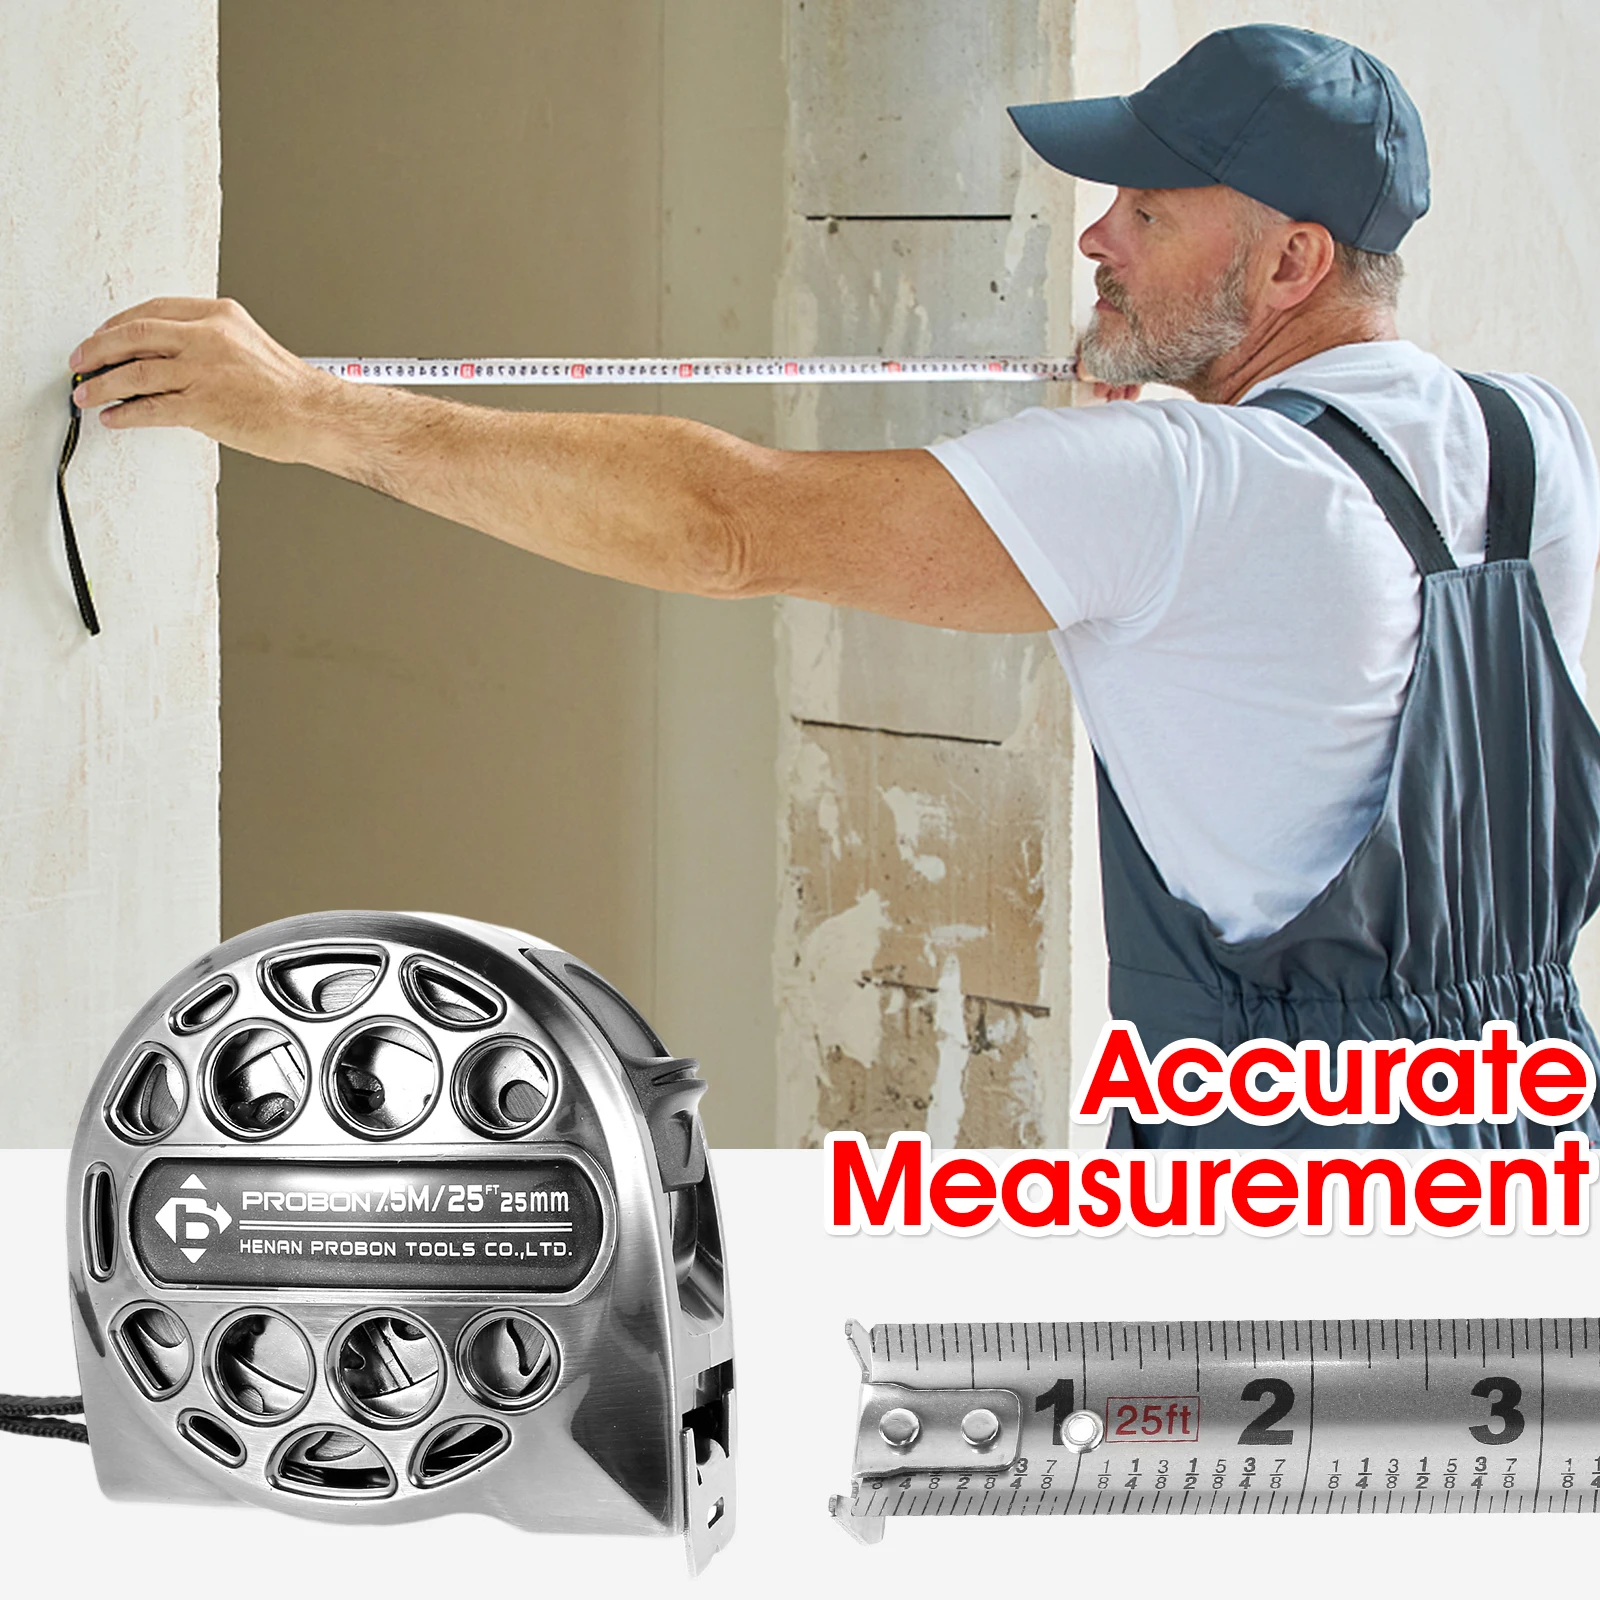 Retractable Tape 25FT Stainless Steel Measuring Tape with Double-sided  Scale Waterproof Portable Retractable Measure Ruler for - AliExpress